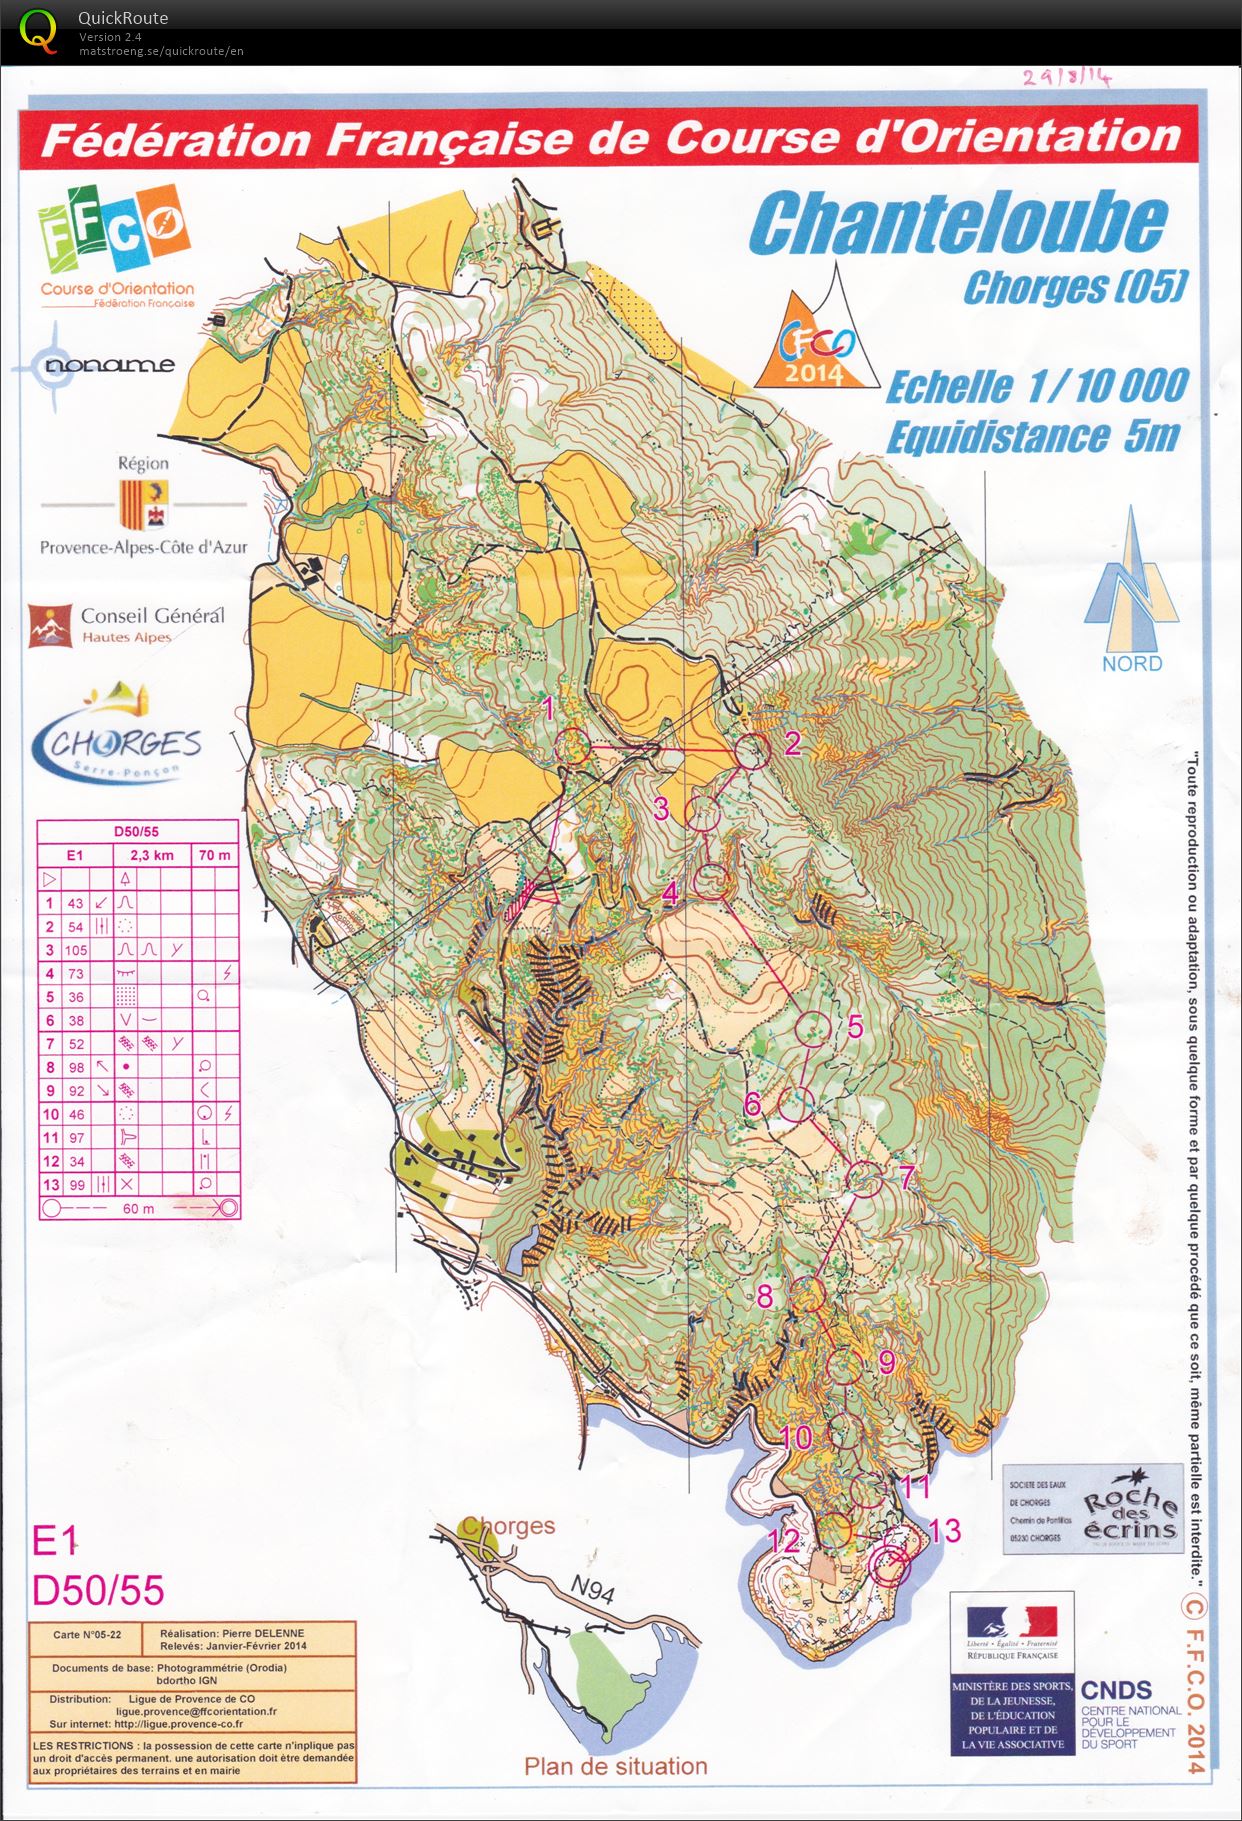 CFCO2014: Moyenne Distance (29.08.2014)